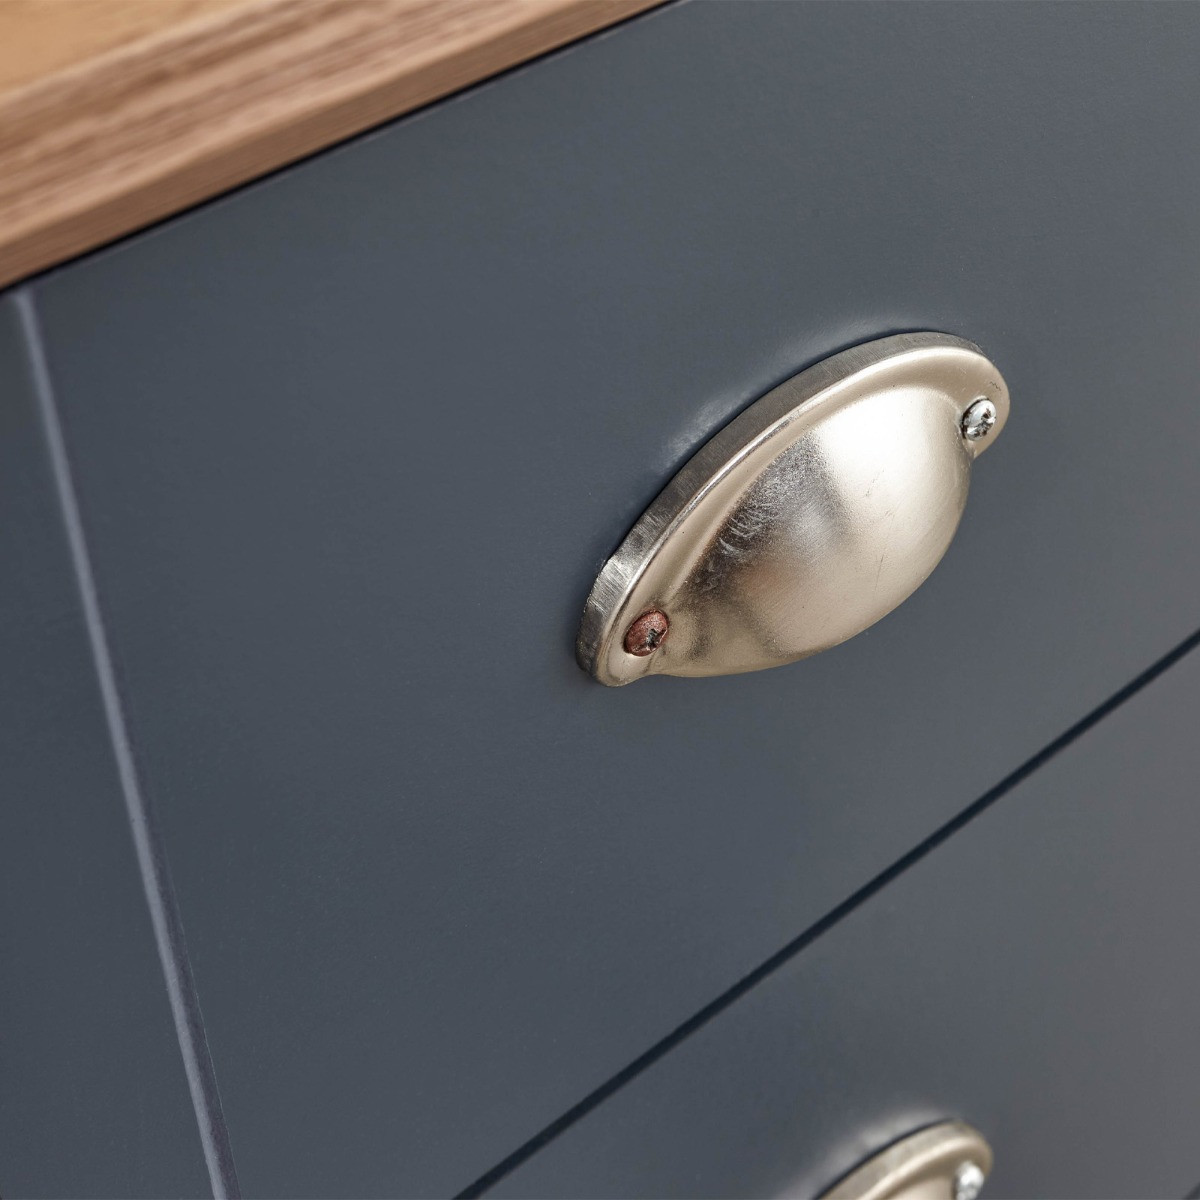 Kendal 3 Drawer Chest of Drawers - Slate Blue>